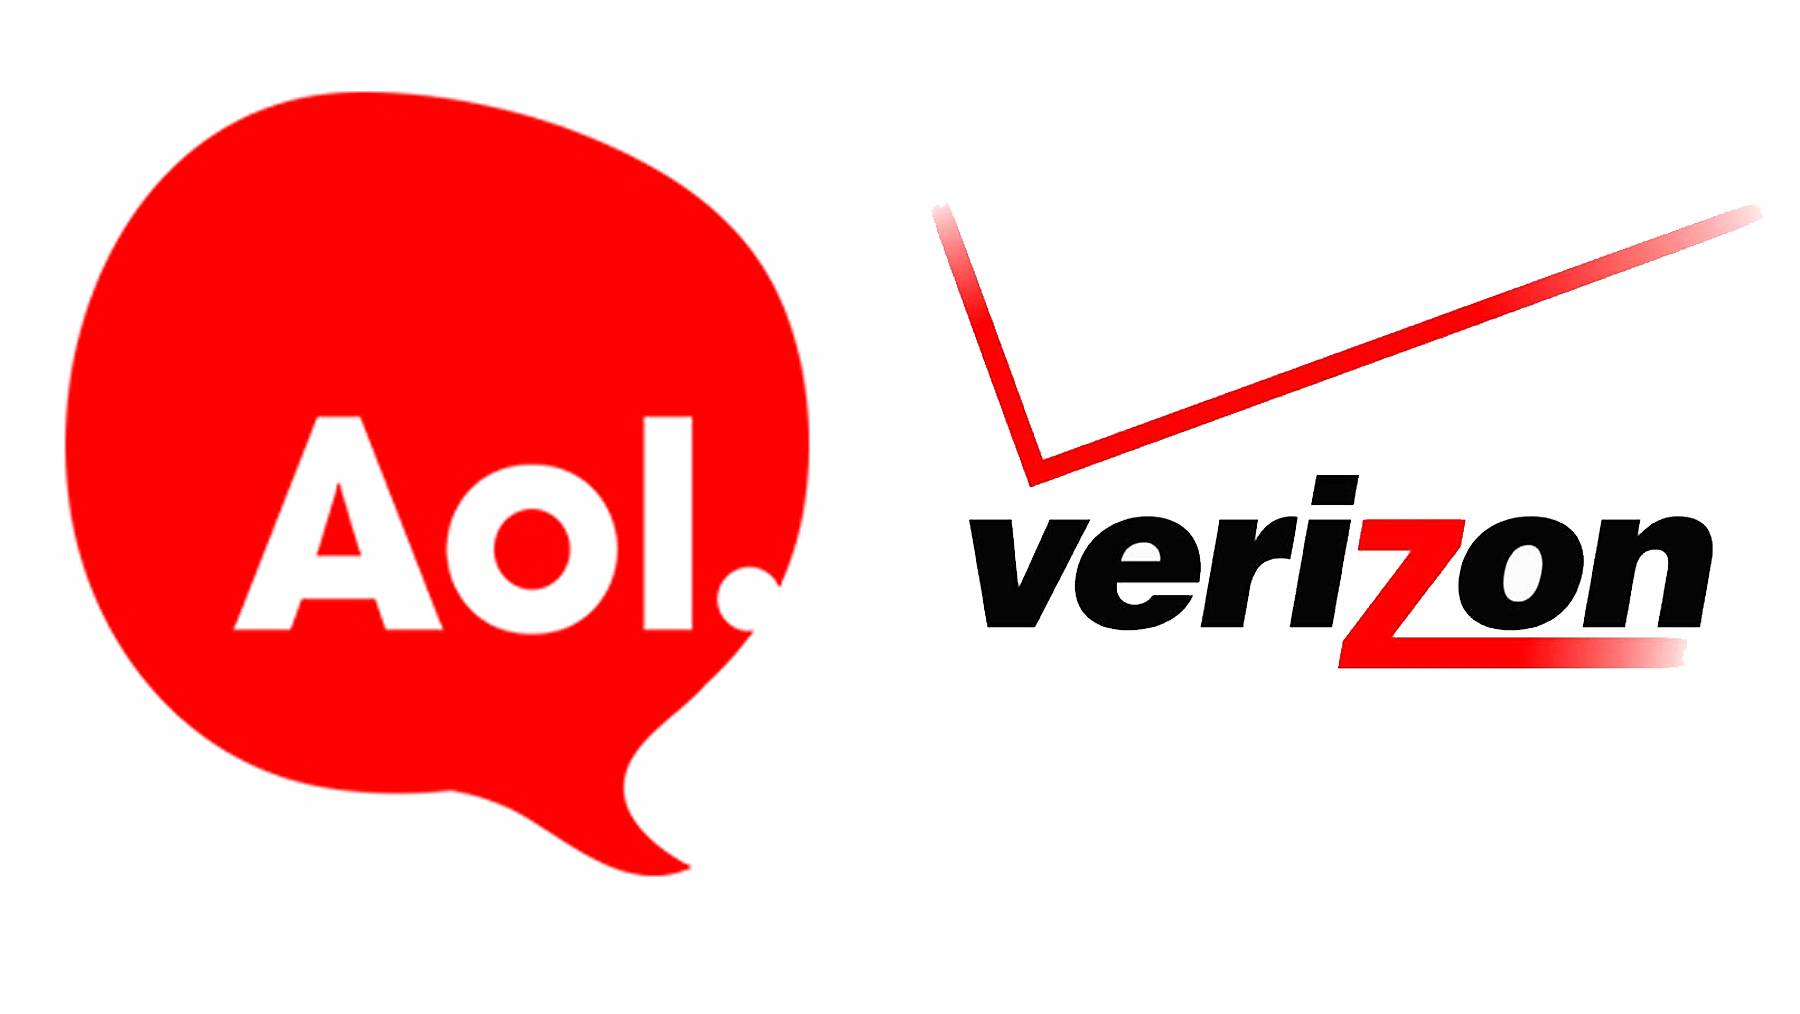 Verizon Buys AOL - Verizon announced that it will buy AOL for $4.4 billion on Tuesday (May 12) morning. This acquisition sets up Verizon, which is the nation's largest wireless carrier, to enter the video and mobile arena. Google, Yahoo and Microsoft are also known for their billion-dollar buyouts. Keep reading to learn about the biggest acquisitions in tech history. -- Patrice Peck&nbsp;(Photos from left: AOL, Verizon)